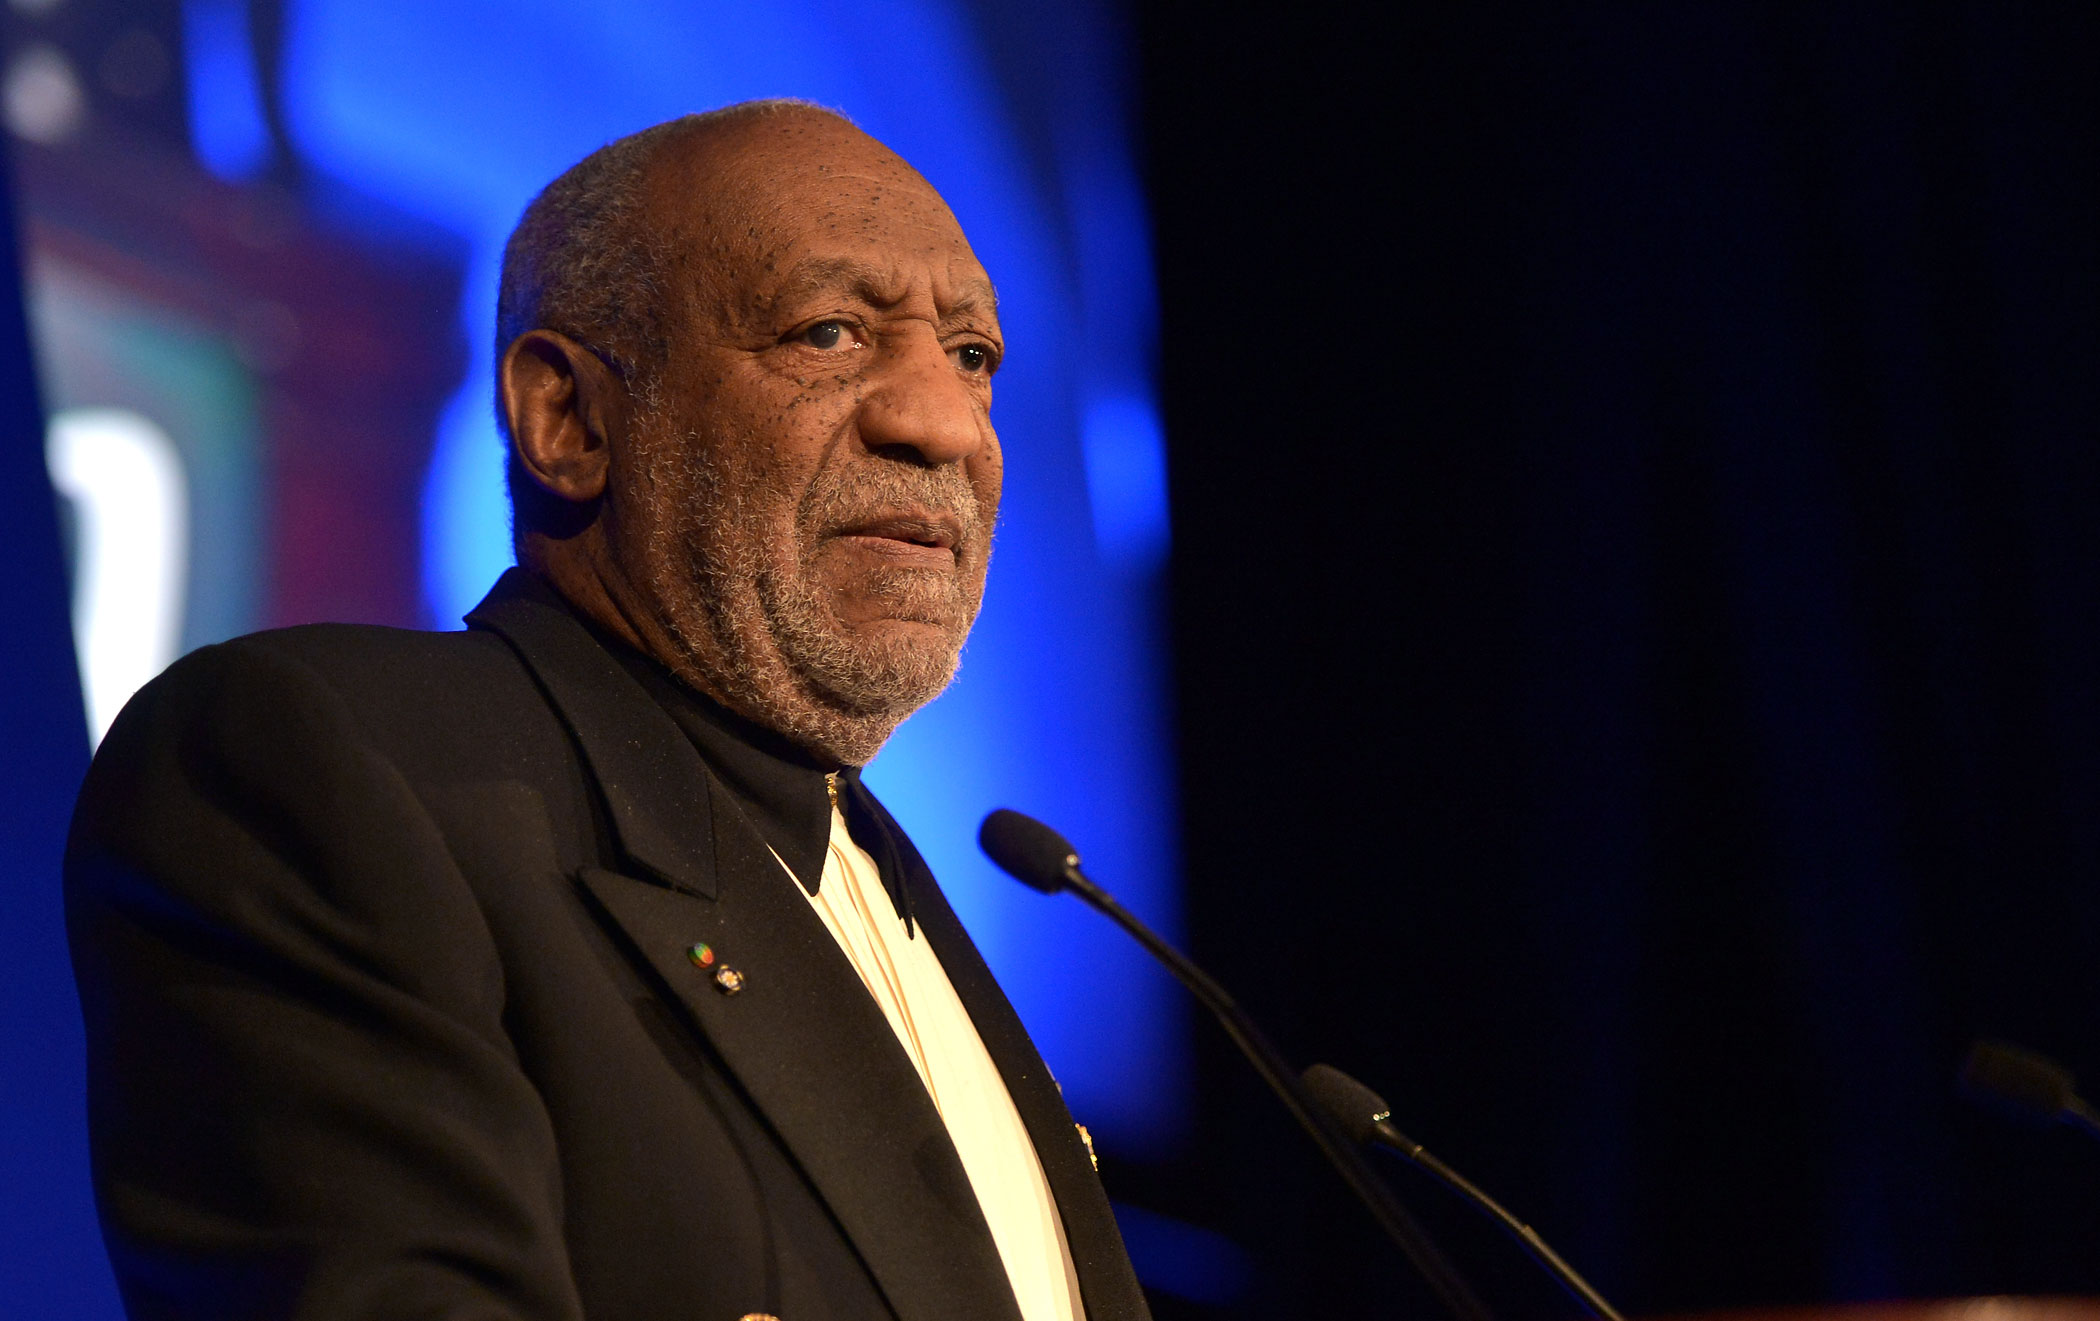 Bill Cosby speaks at the Jackie Robinson Foundation 2014 Awards Dinner at the Waldorf Astoria Hotel on March 3, 2014 in New York City. (Stephen Lovekin—Getty Images)